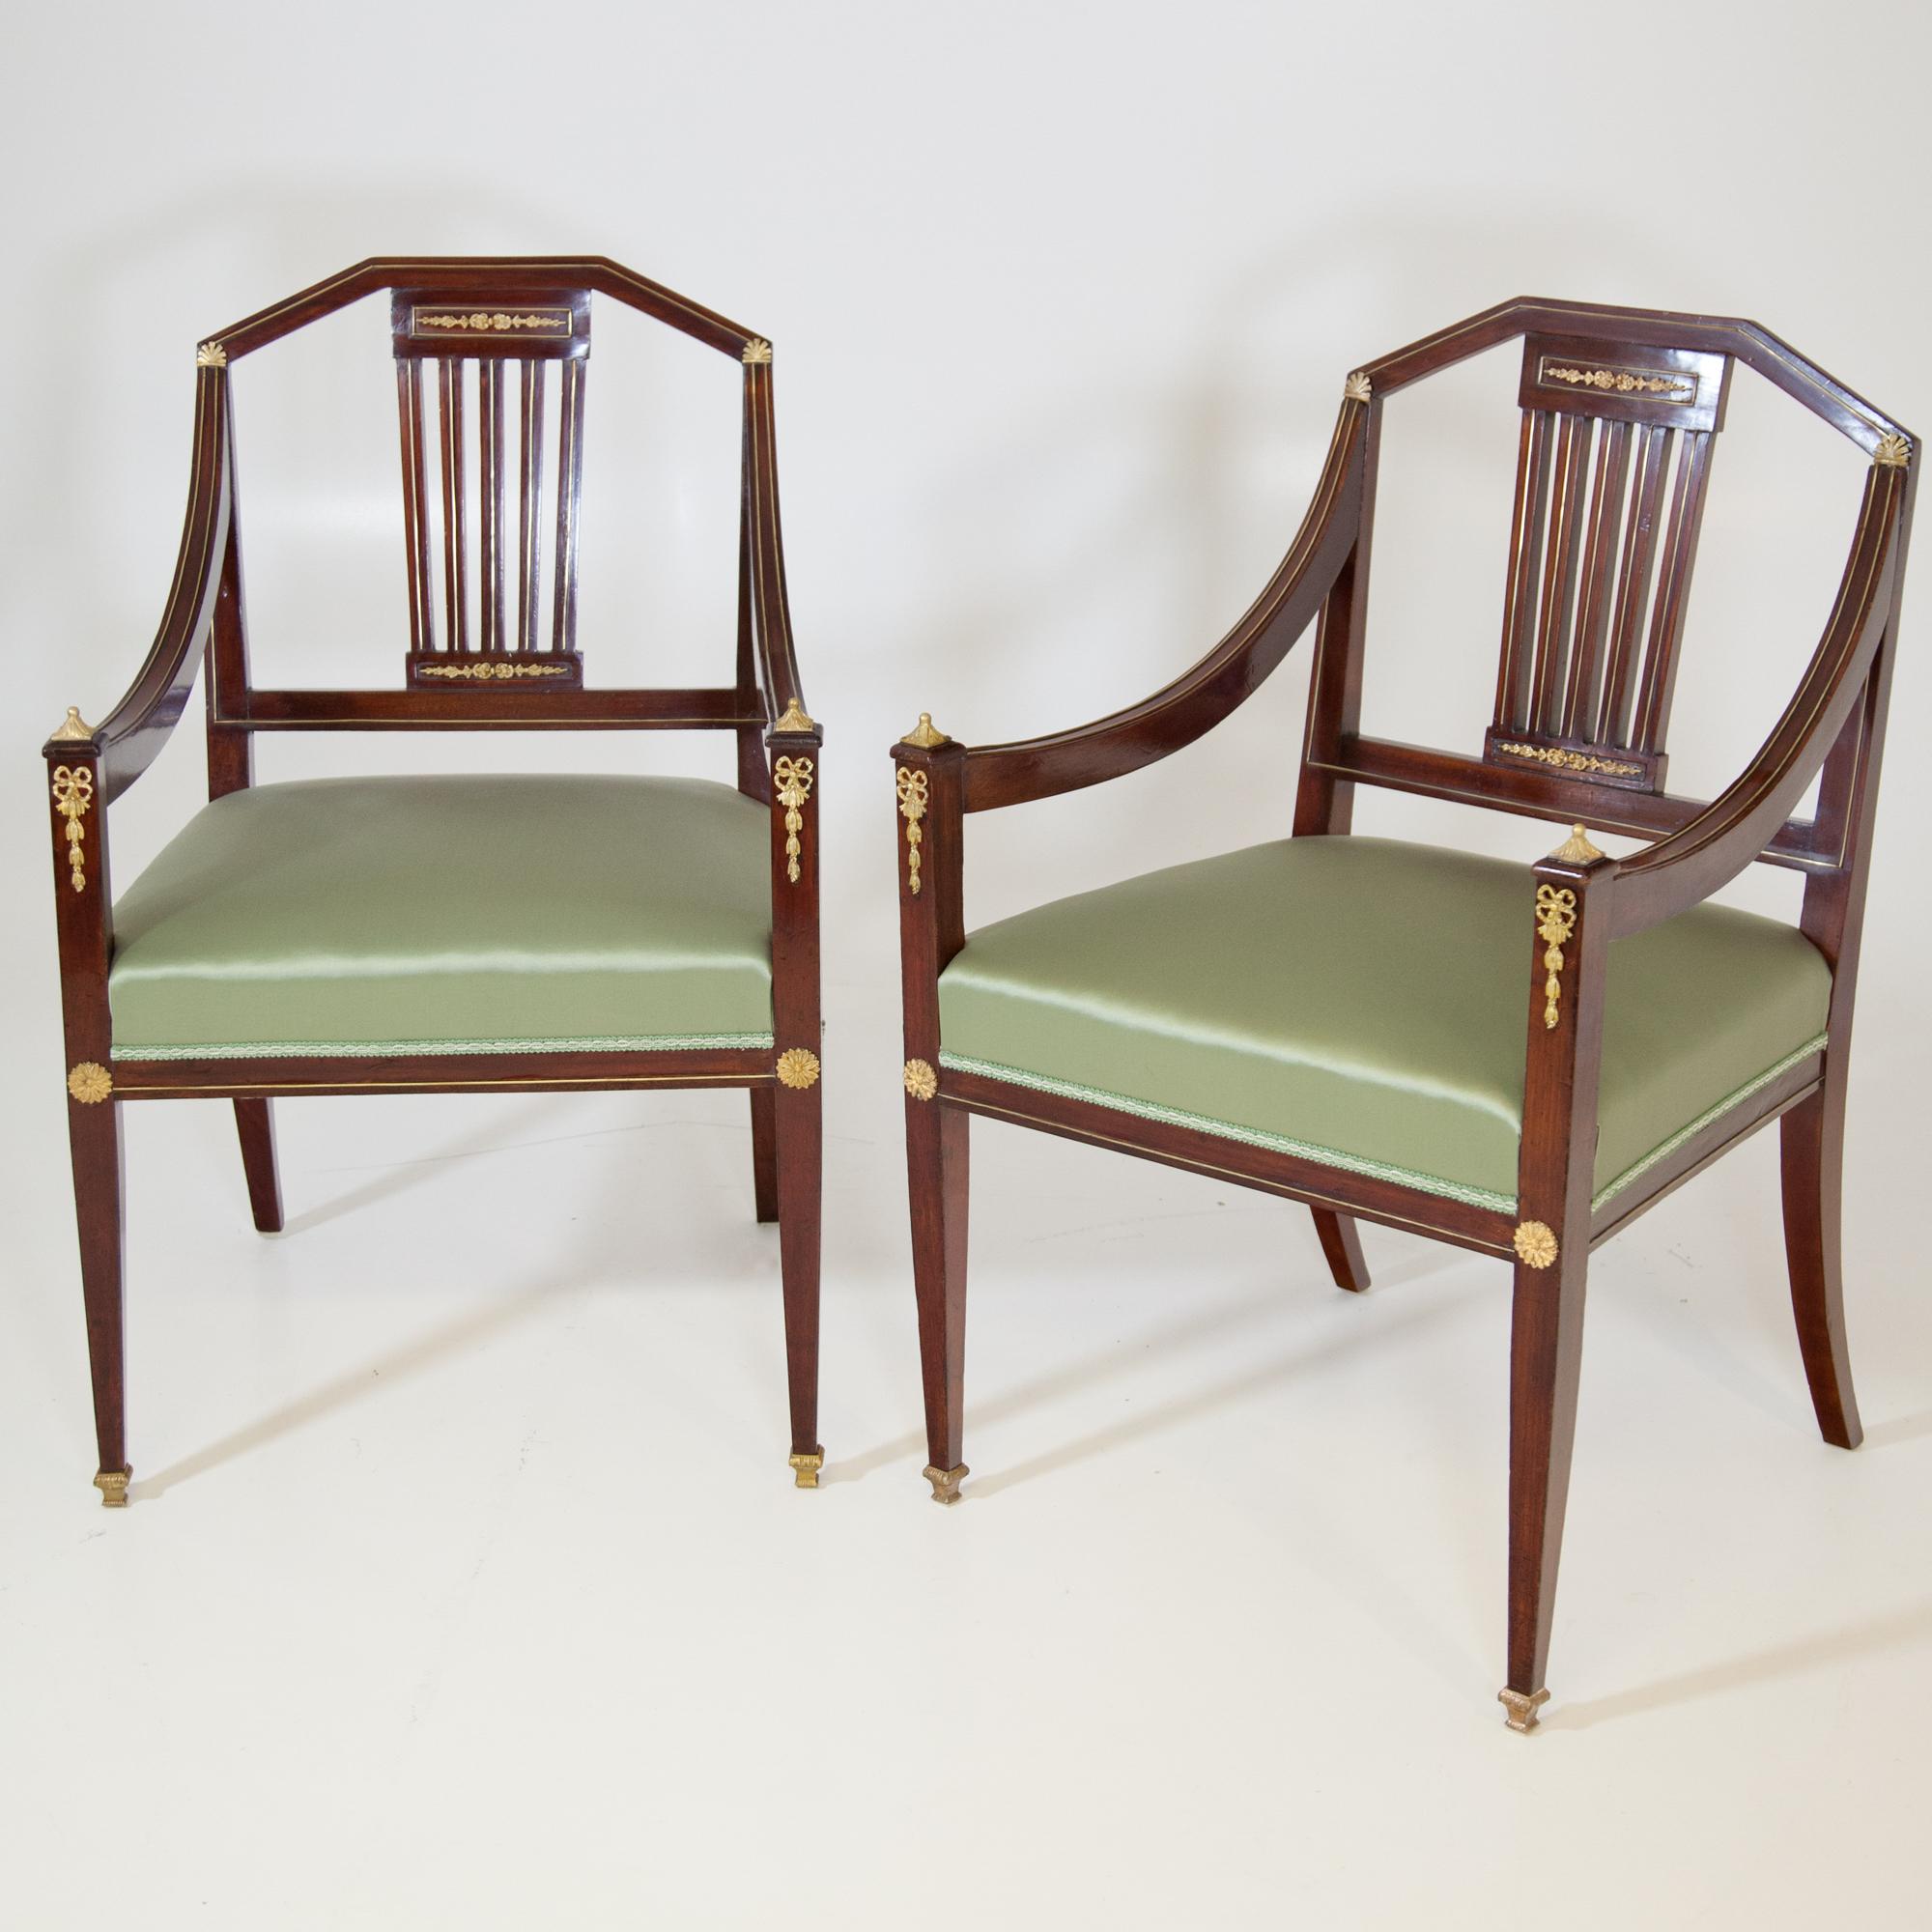 Pair of Josephine armchairs on square tapered legs with bronze sabots at the front and slightly flared legs at the back. The angular backrests with vertical struts, the rails are straight. The armrests are lowered in a slight curve and end on the